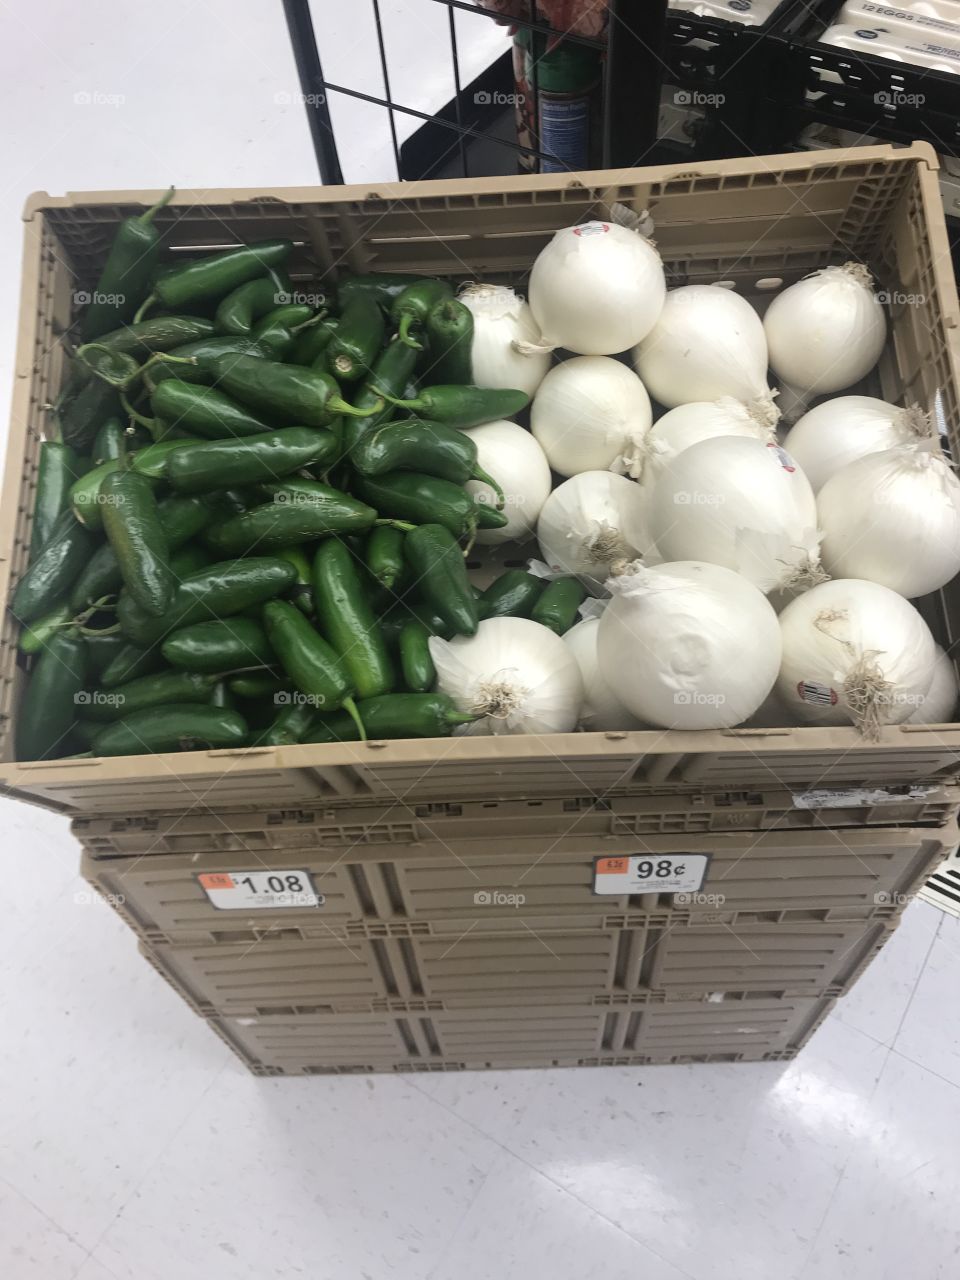 Green jalapeños peppers and white onions on sale at the grocery store